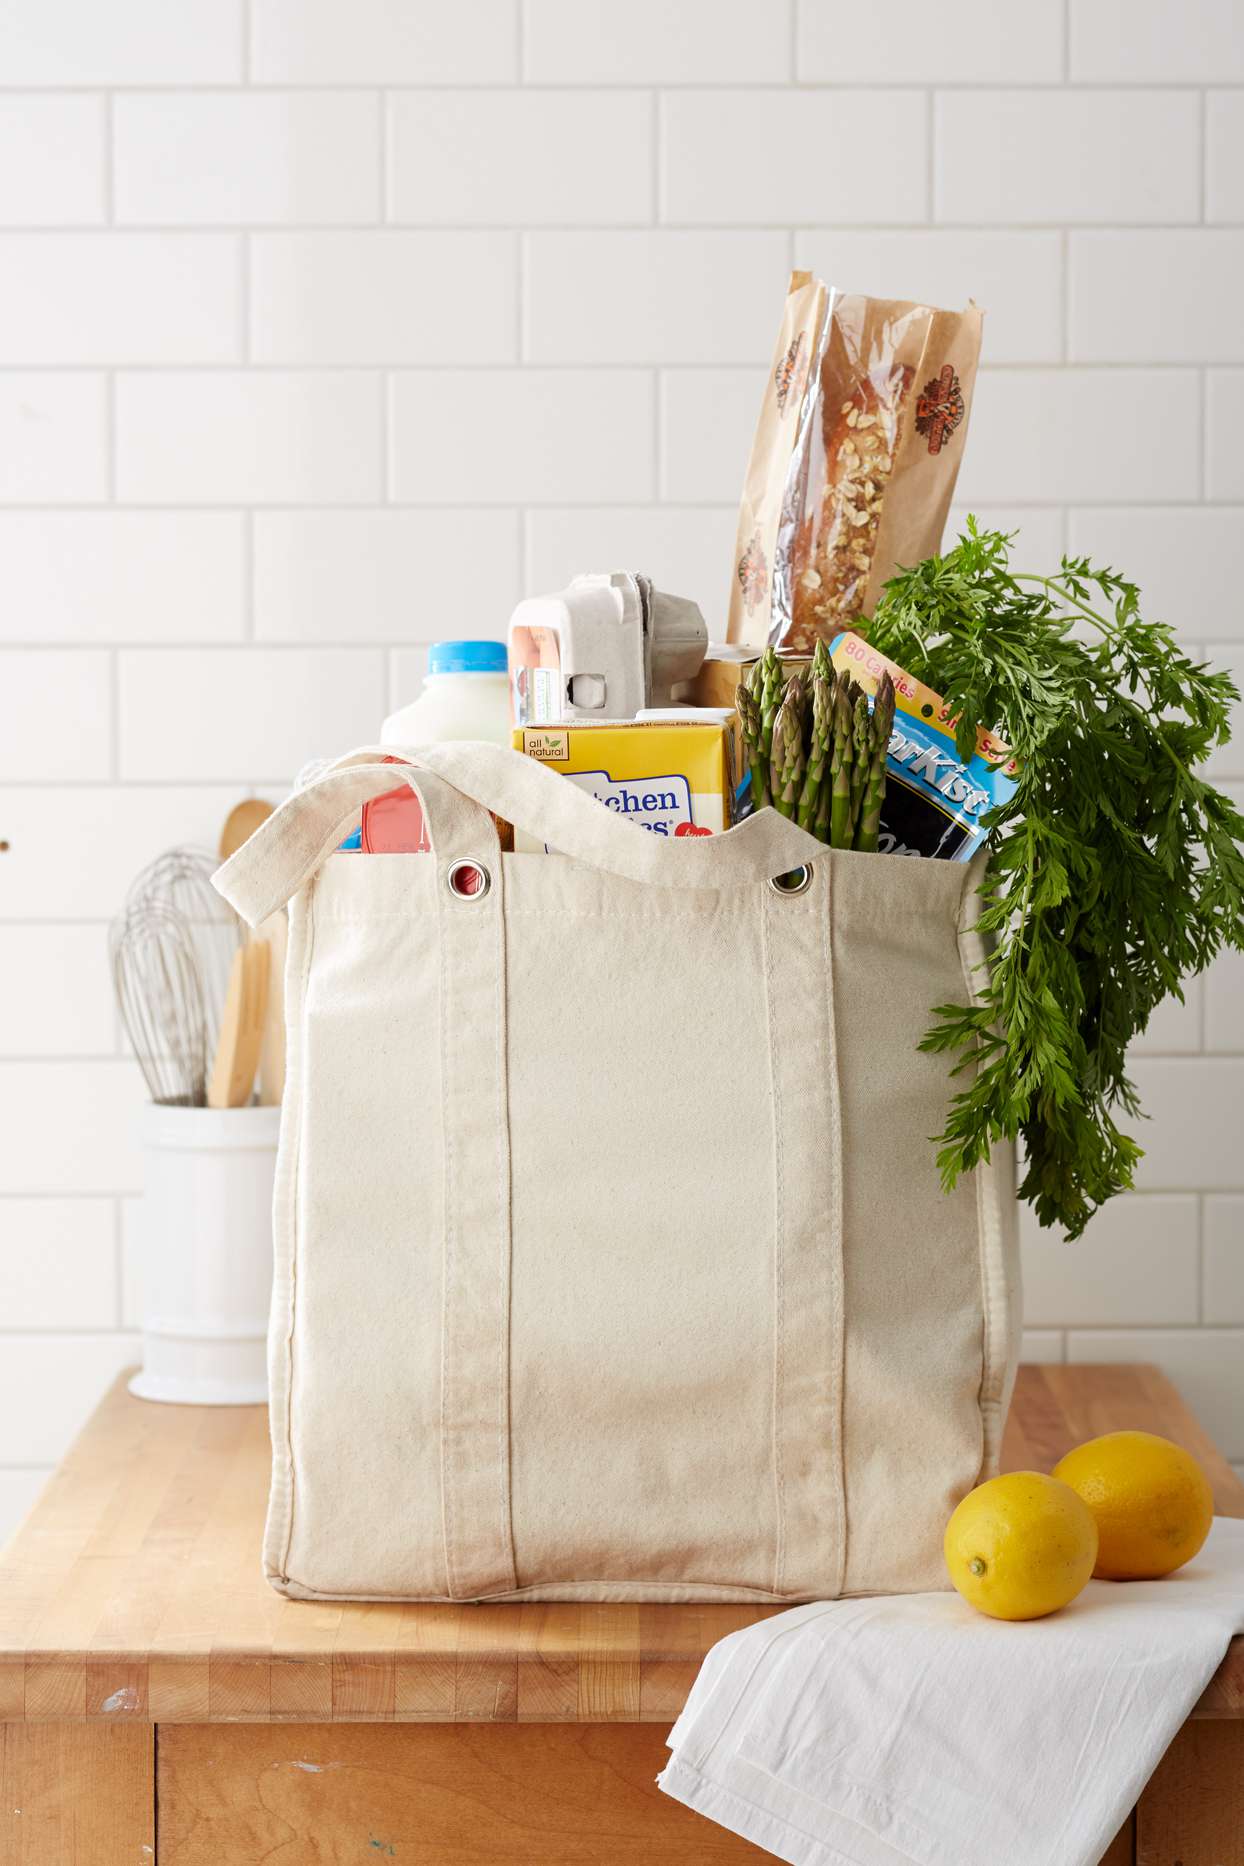 tote bag containing groceries